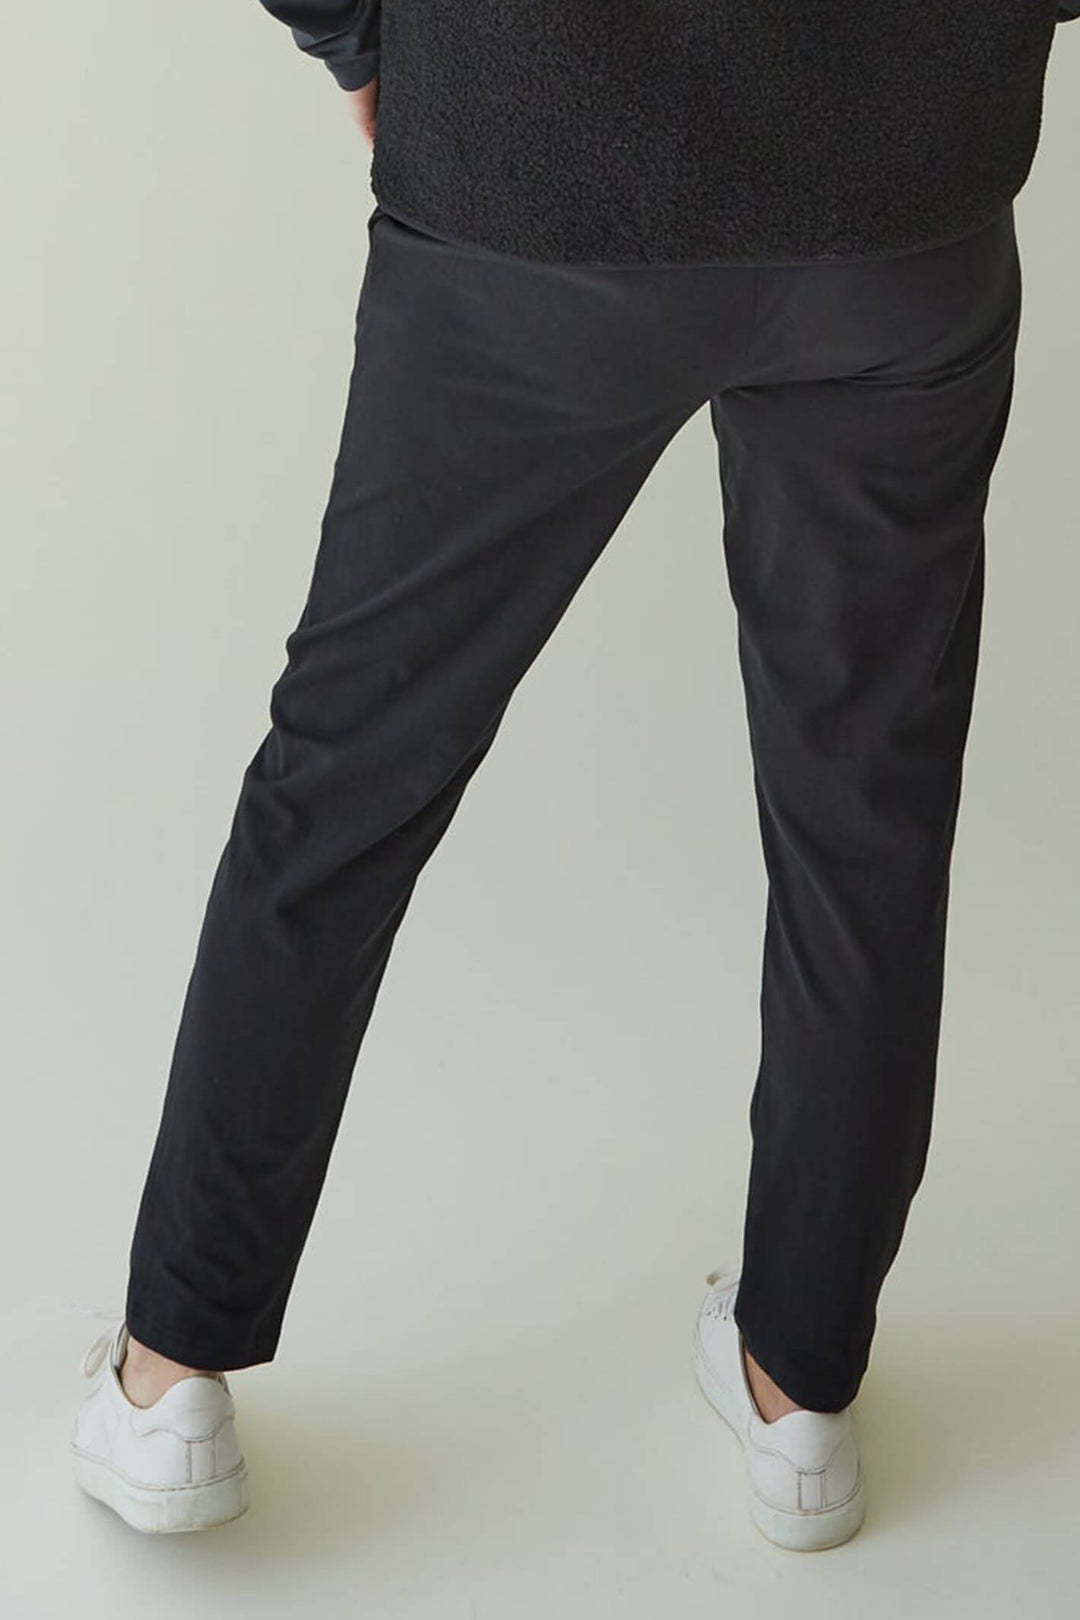 Chalk Brooke Black Slim Fit Organic Jersey Trousers - Dotique Chesterfield